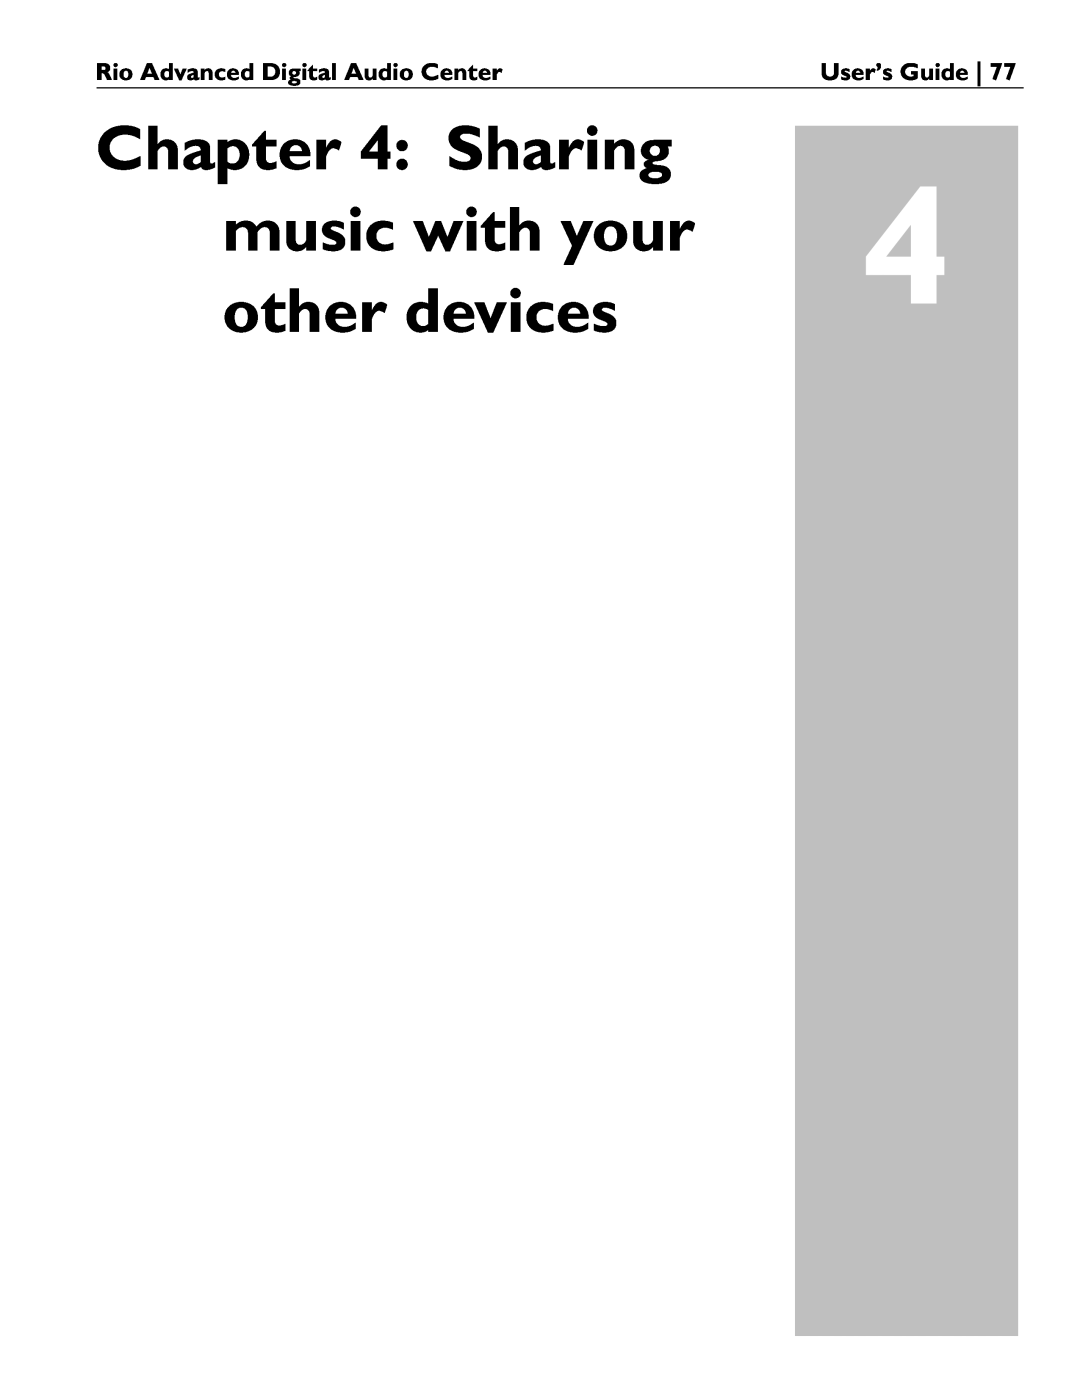 Rio Audio manual Sharing, music with your, other devices, Rio Advanced Digital Audio Center, User’s Guide 